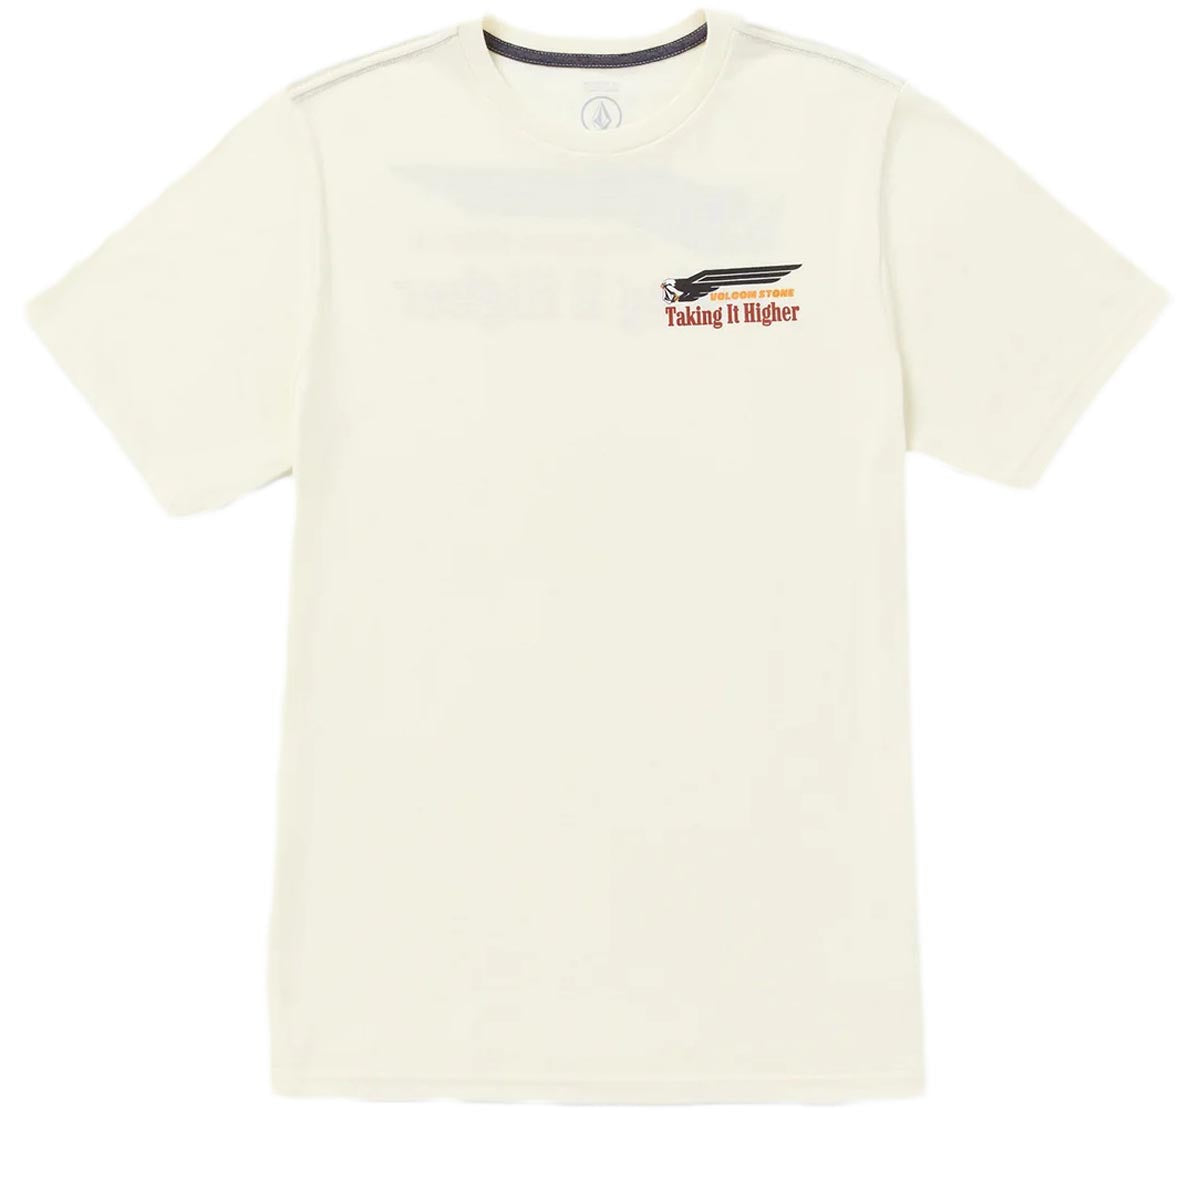 Volcom Take It Higher T-Shirt - Off White Heather image 1